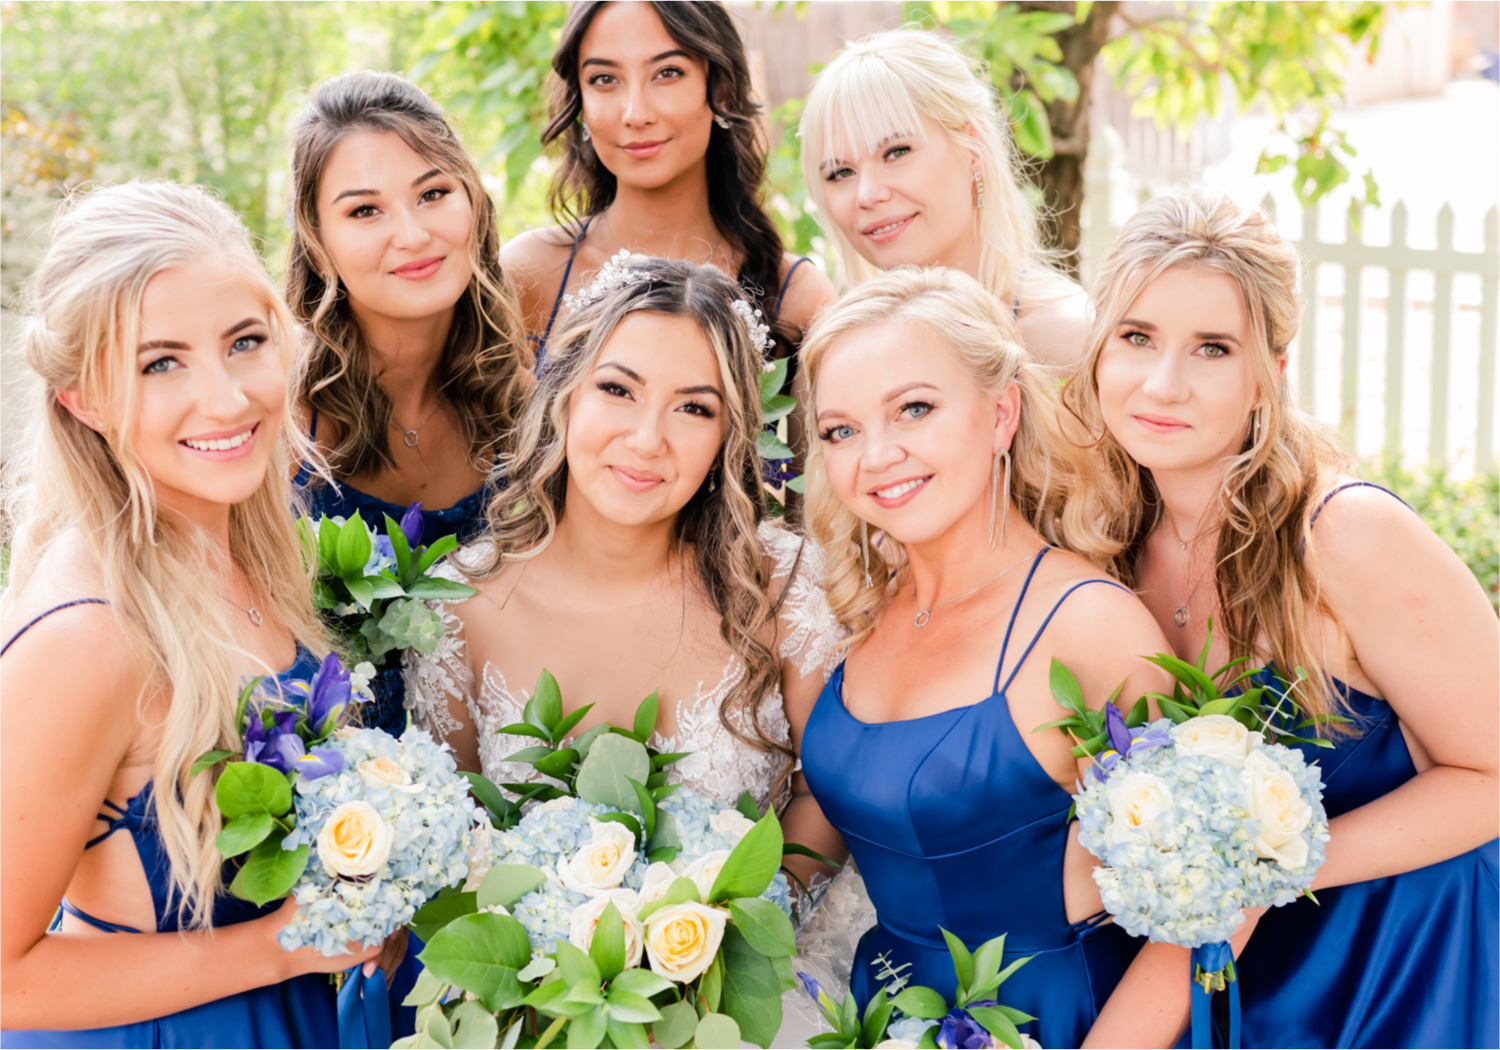 Romantic and Rustic Wedding at The Mill in Windsor | Britni Girard Photography | Colorado based wedding photography and videography team | Royal Blue and White Bridal Party